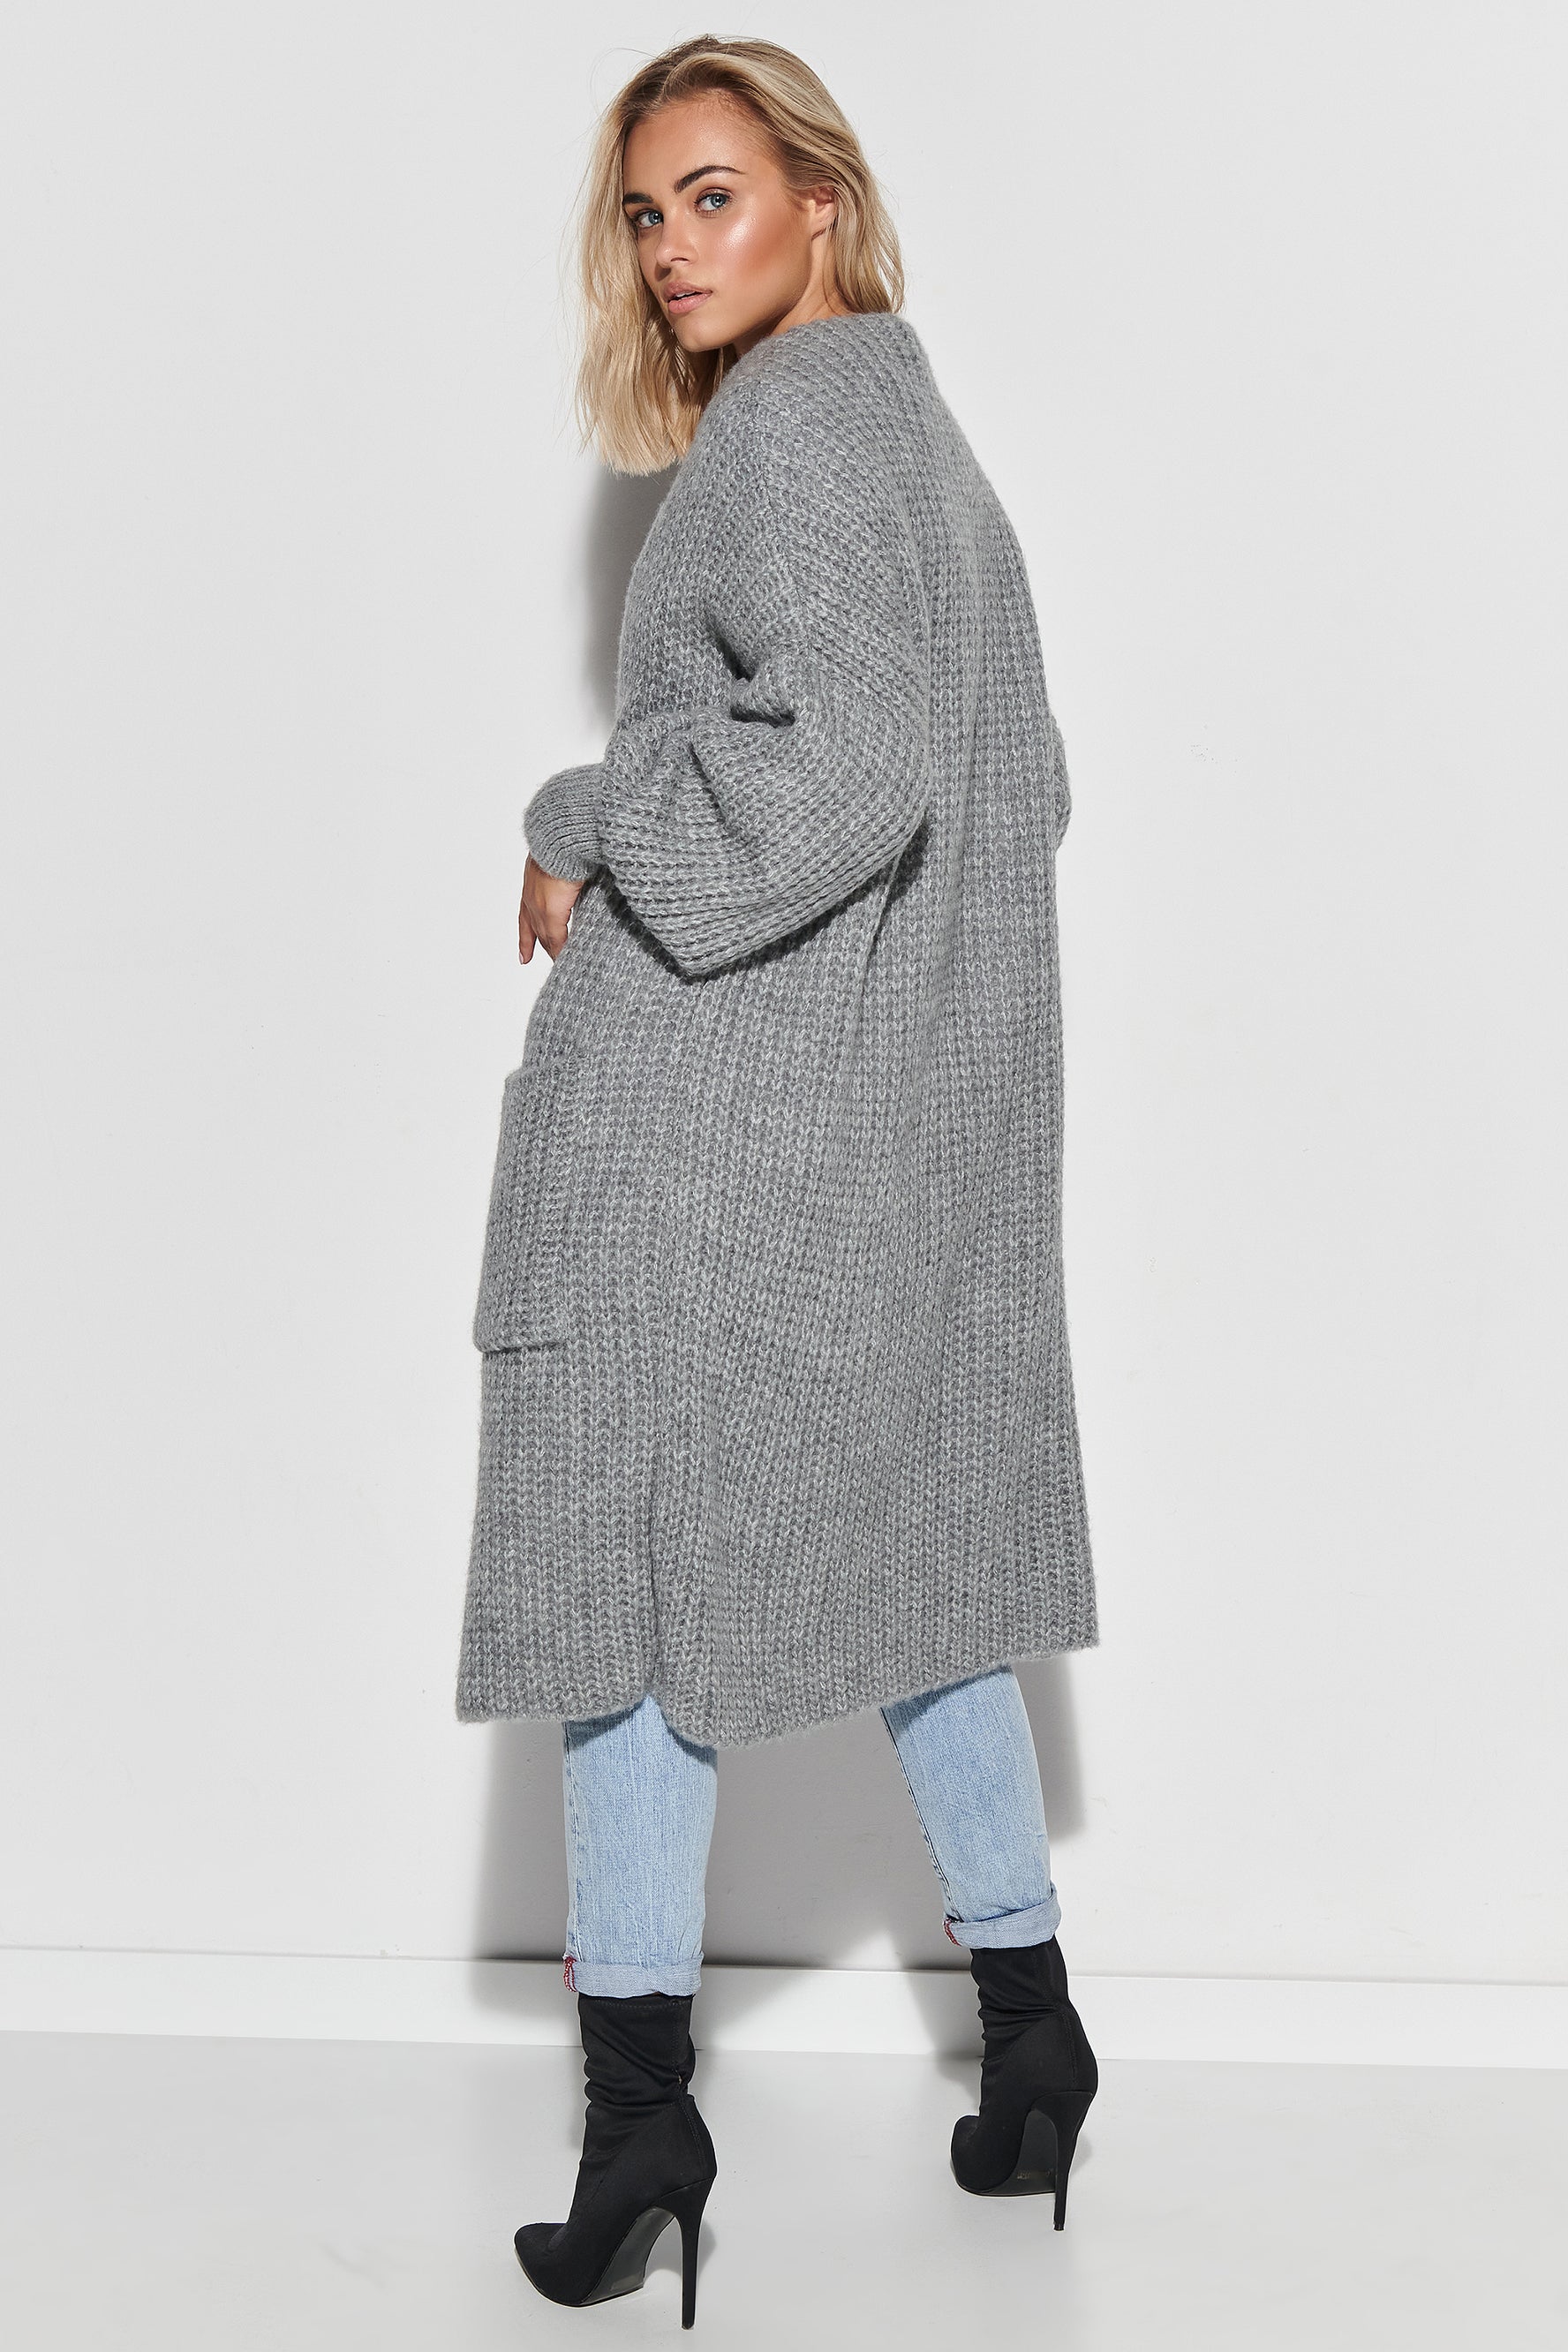 Grey Wide Sleeve Long Cardigan with Buttons at Strictly Influential